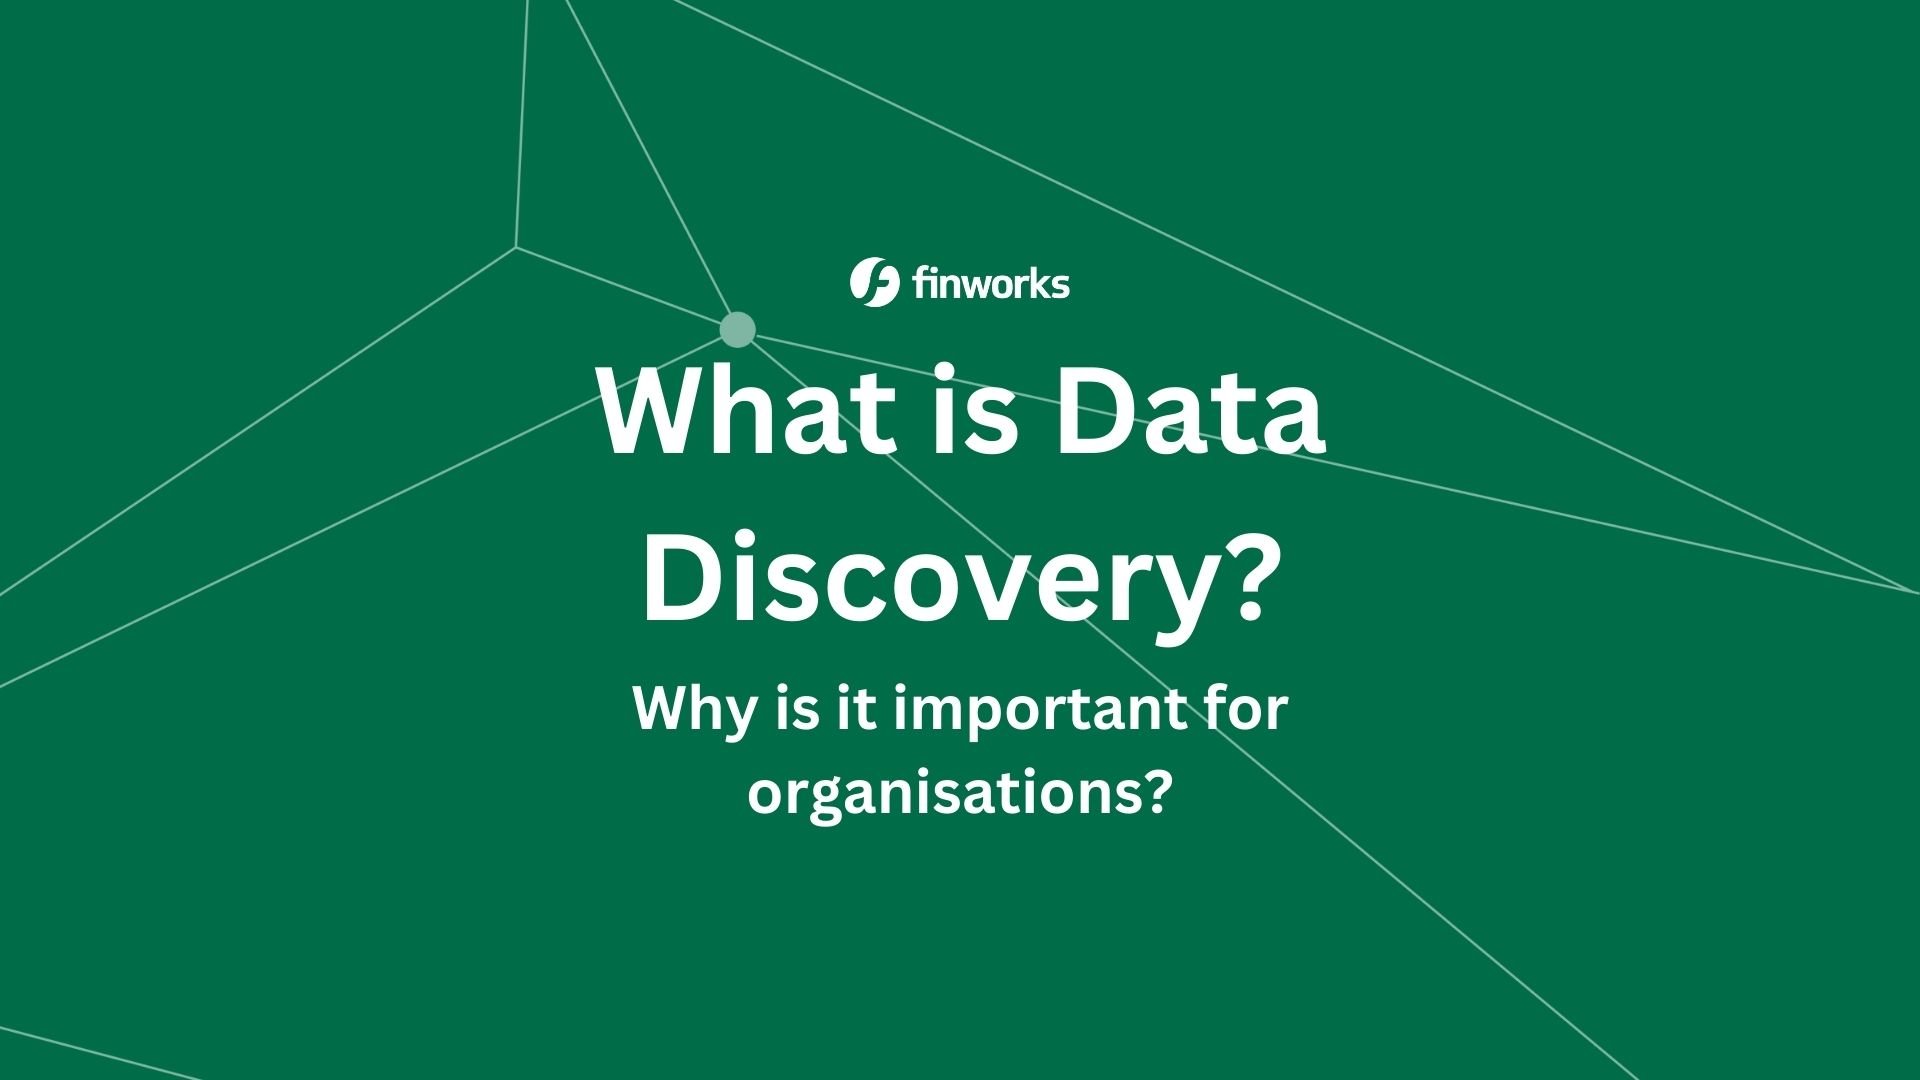 What is Data Discovery?